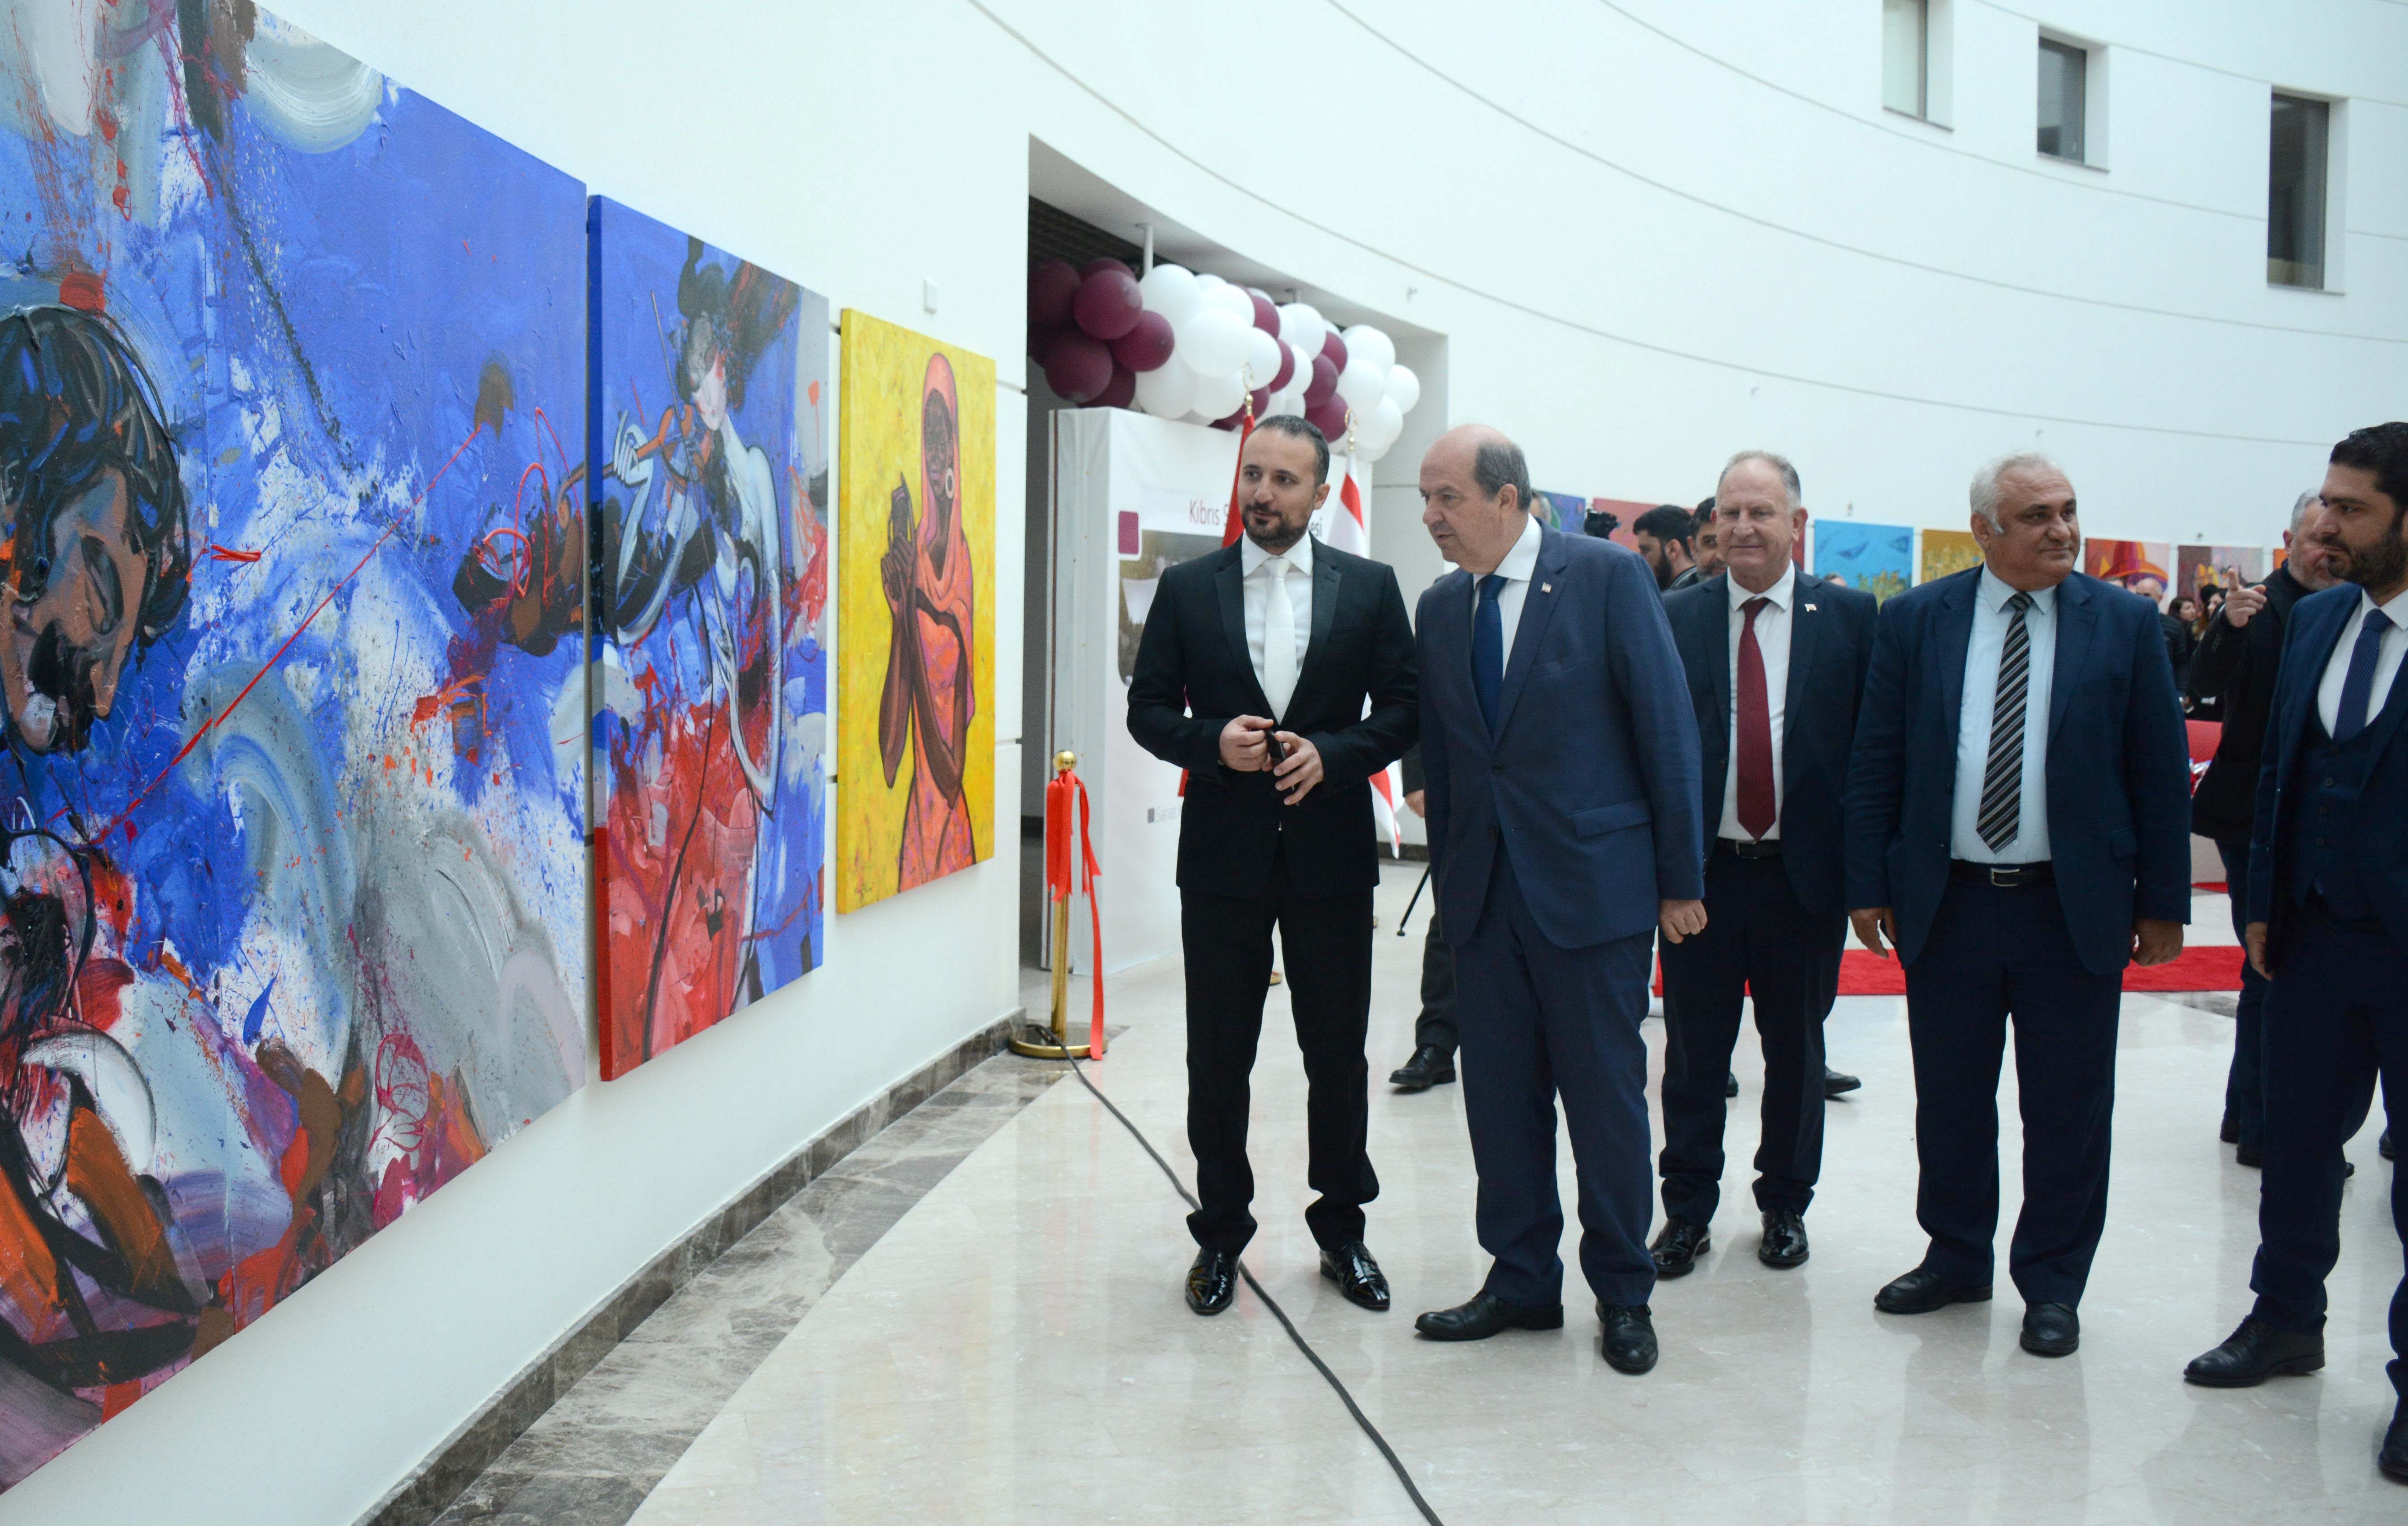 The Exhibition of 45 Art Pieces made by Azerbaijani Artists Especially for the Cyprus Museum of Modern Arts has been opened by the Head of National Unity Part Ersin Tatar